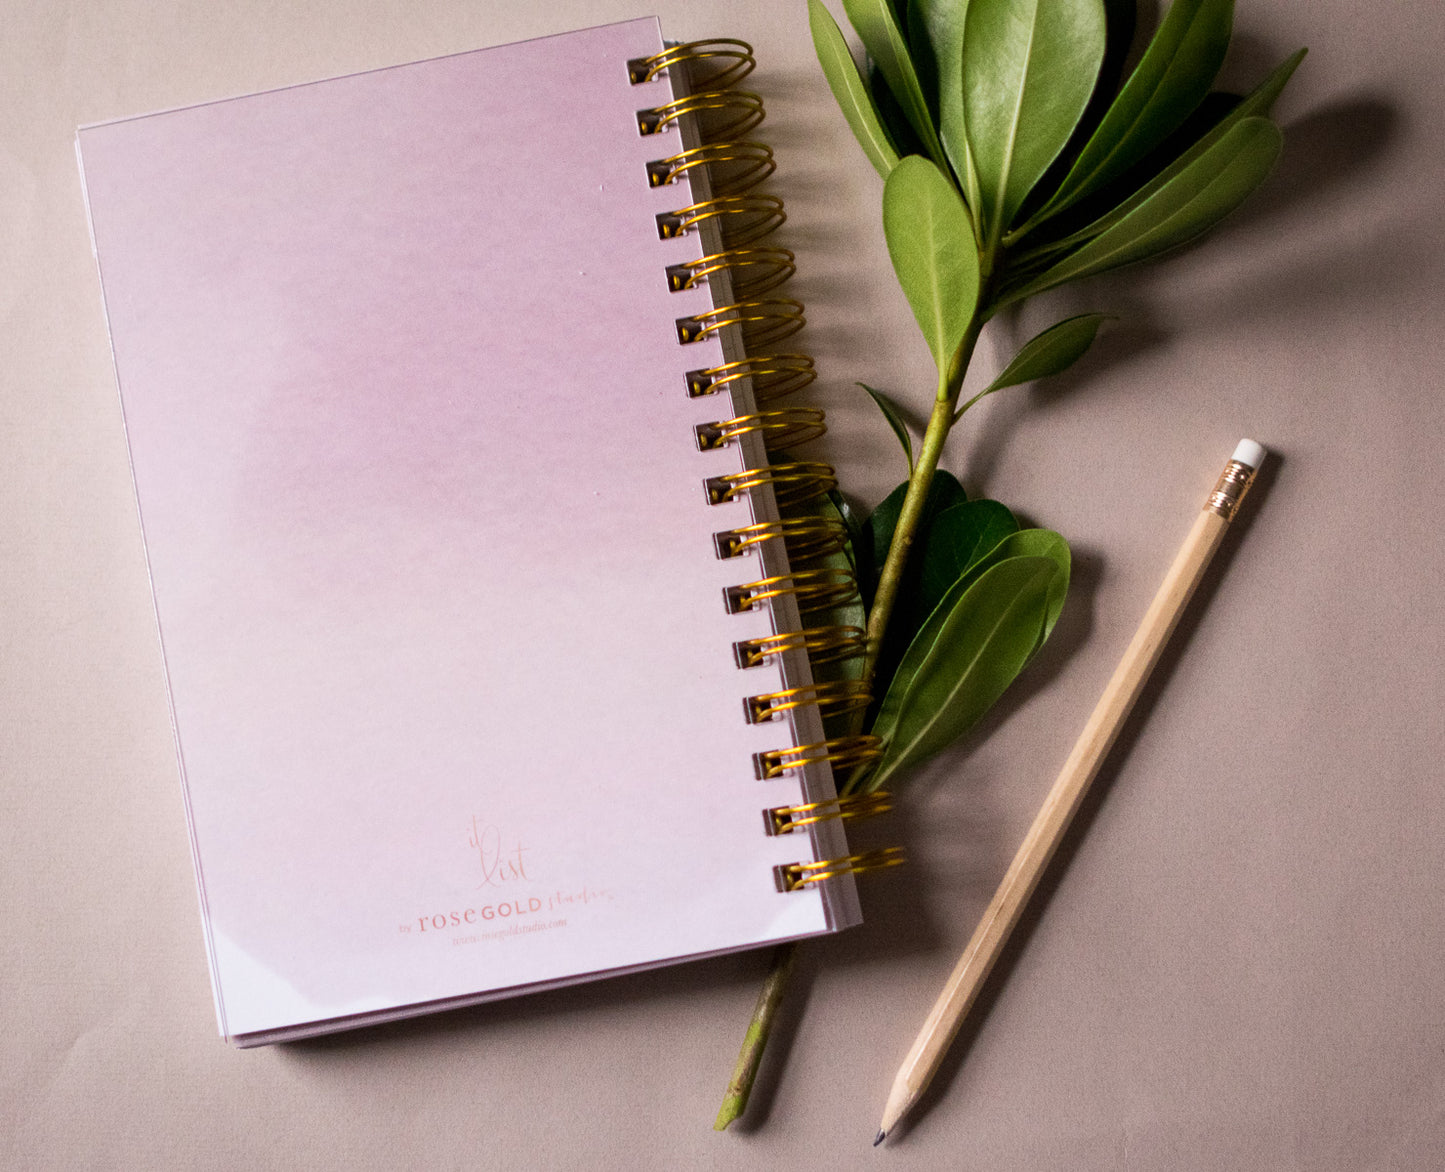 It List Planner by Rose Gold Studio | Personal + Professional - Pink Watercolor Cover